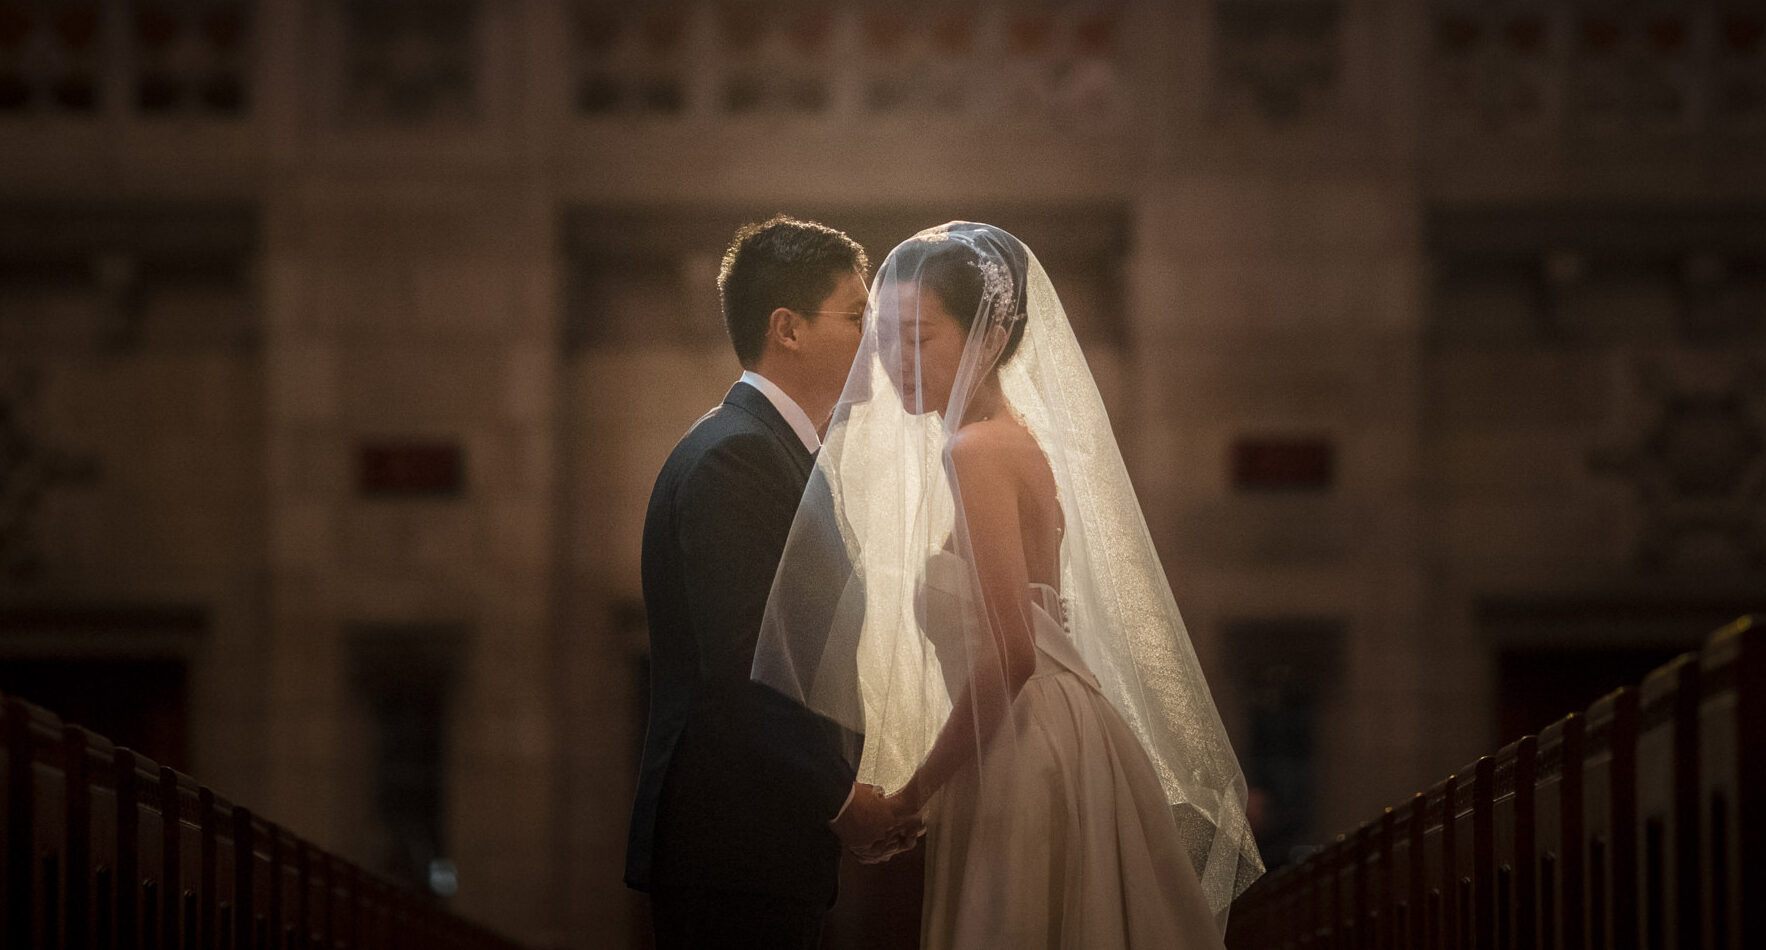 Bride and groom sharing a tender moment under soft lighting in the ornate hall of Princeton University.